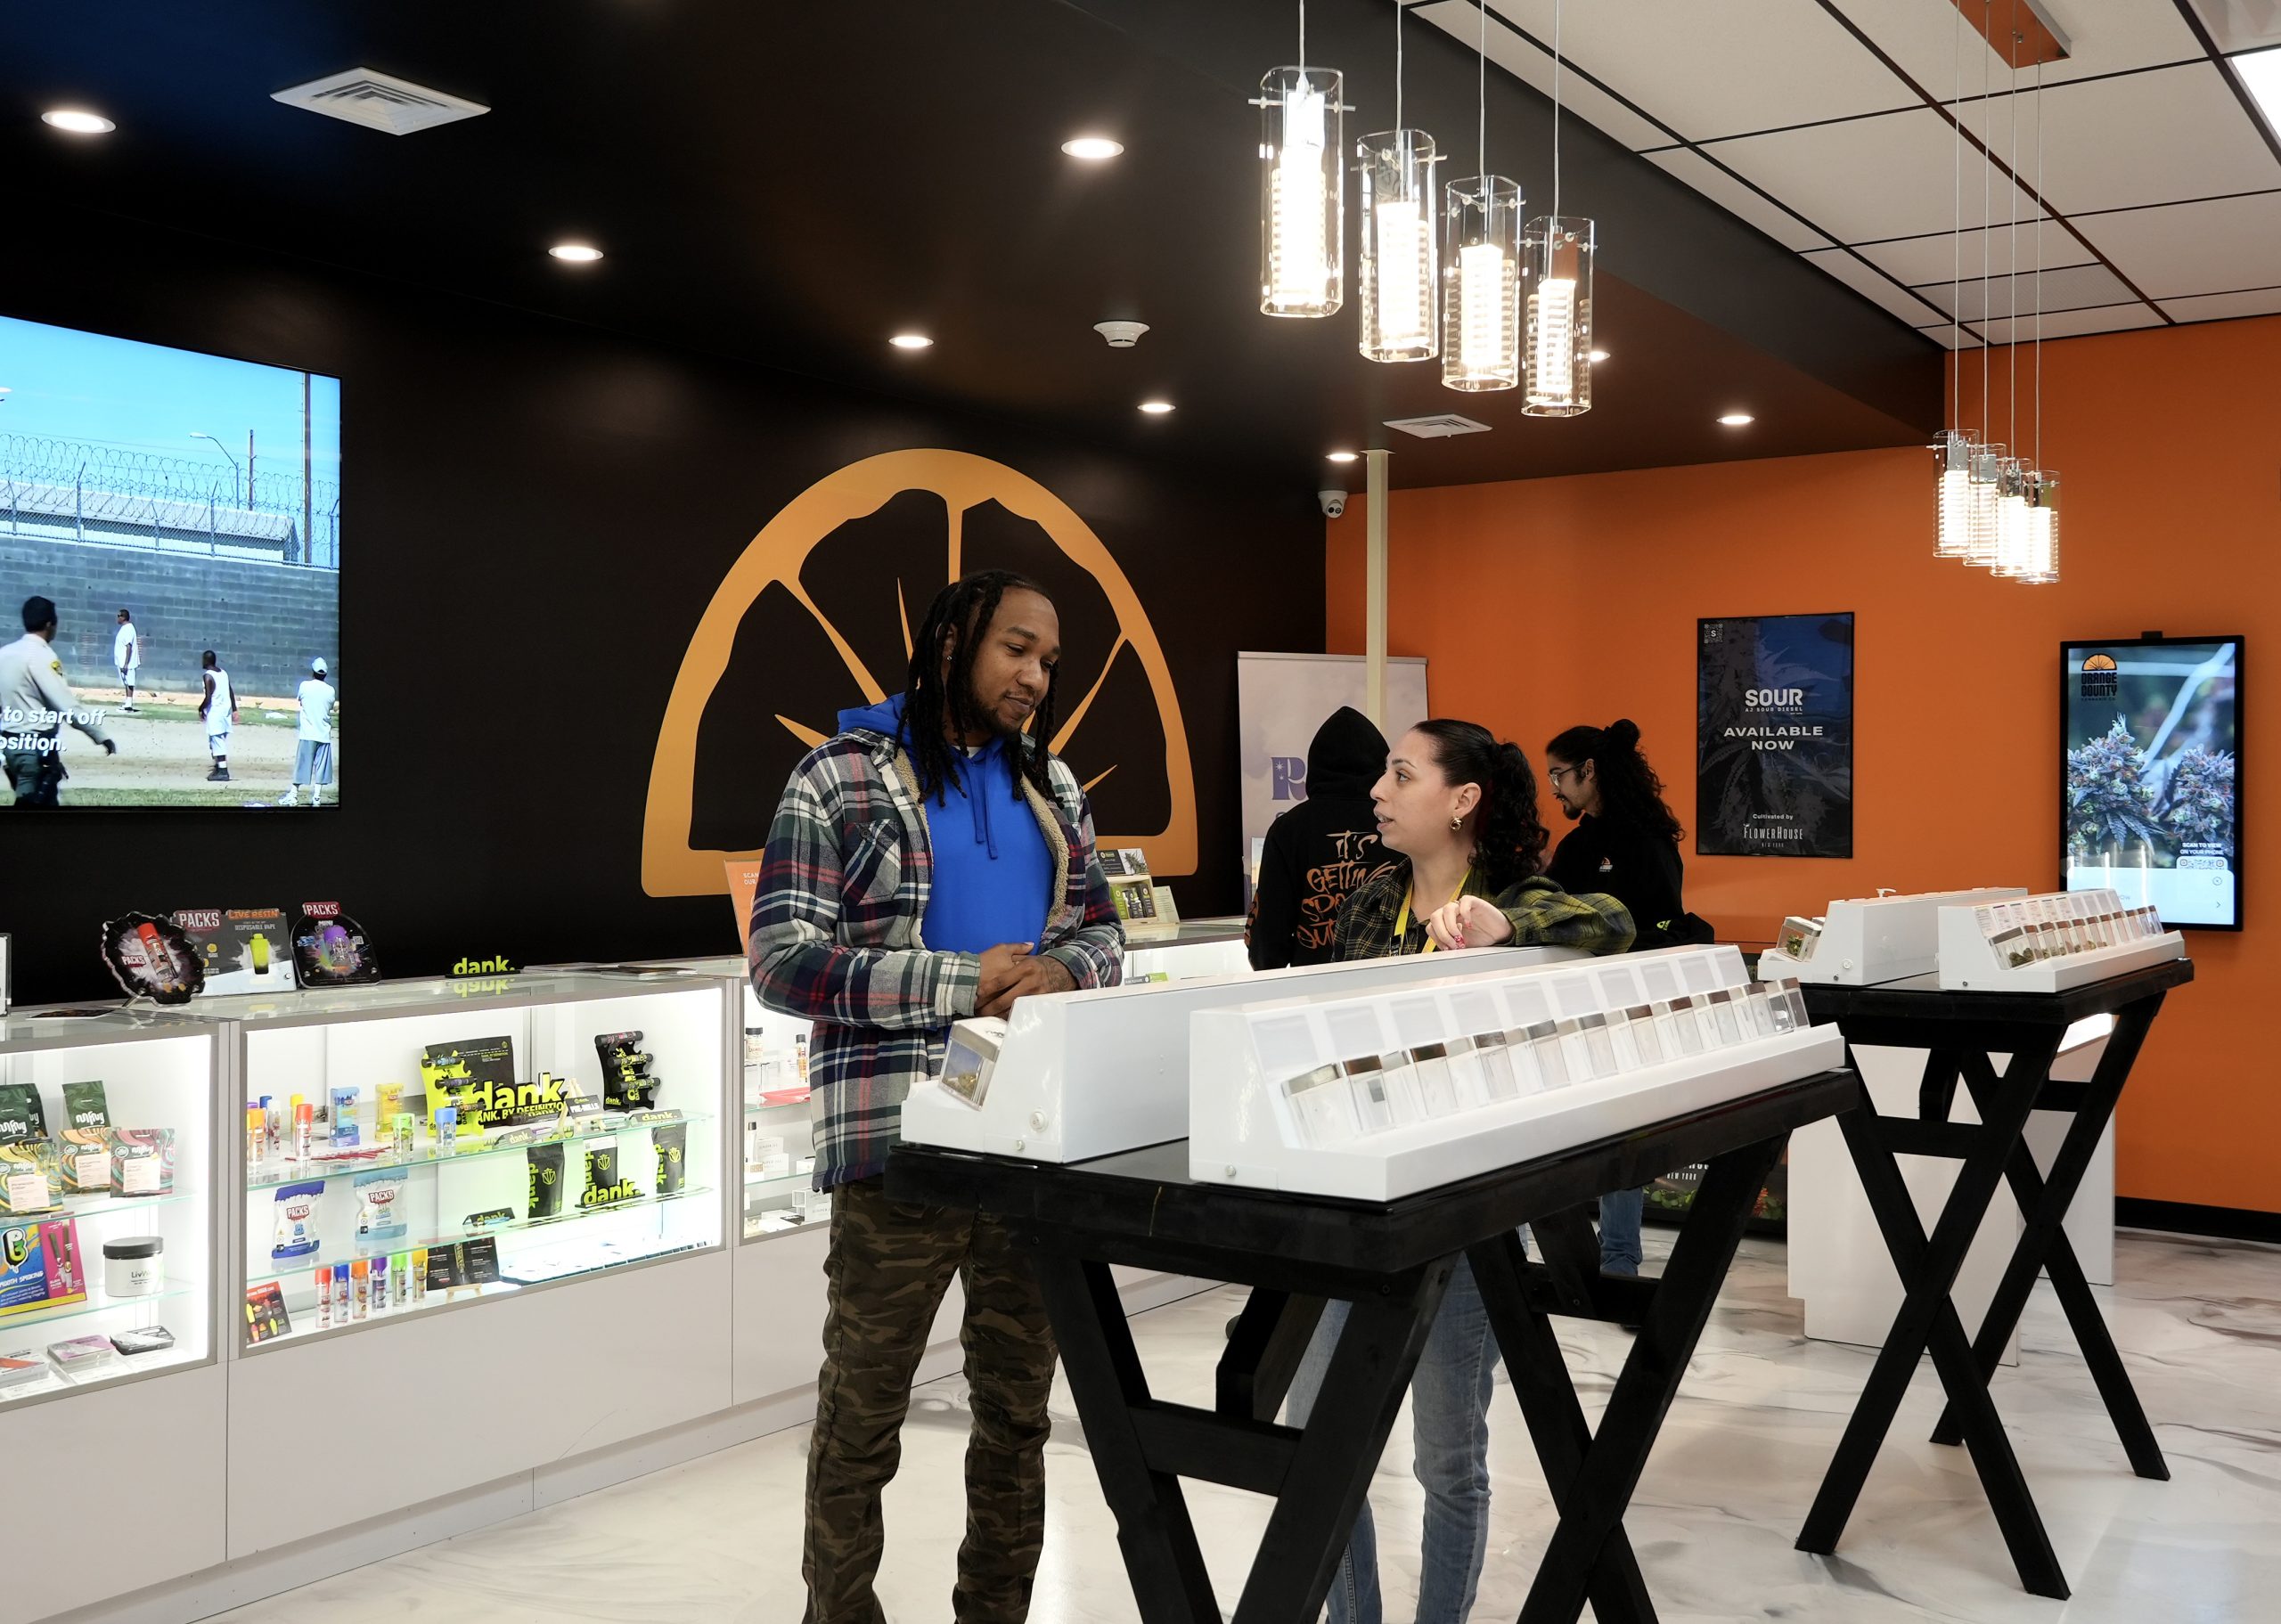 A Guide to Quality, Education, and Empowerment at Orange County Cannabis Co.